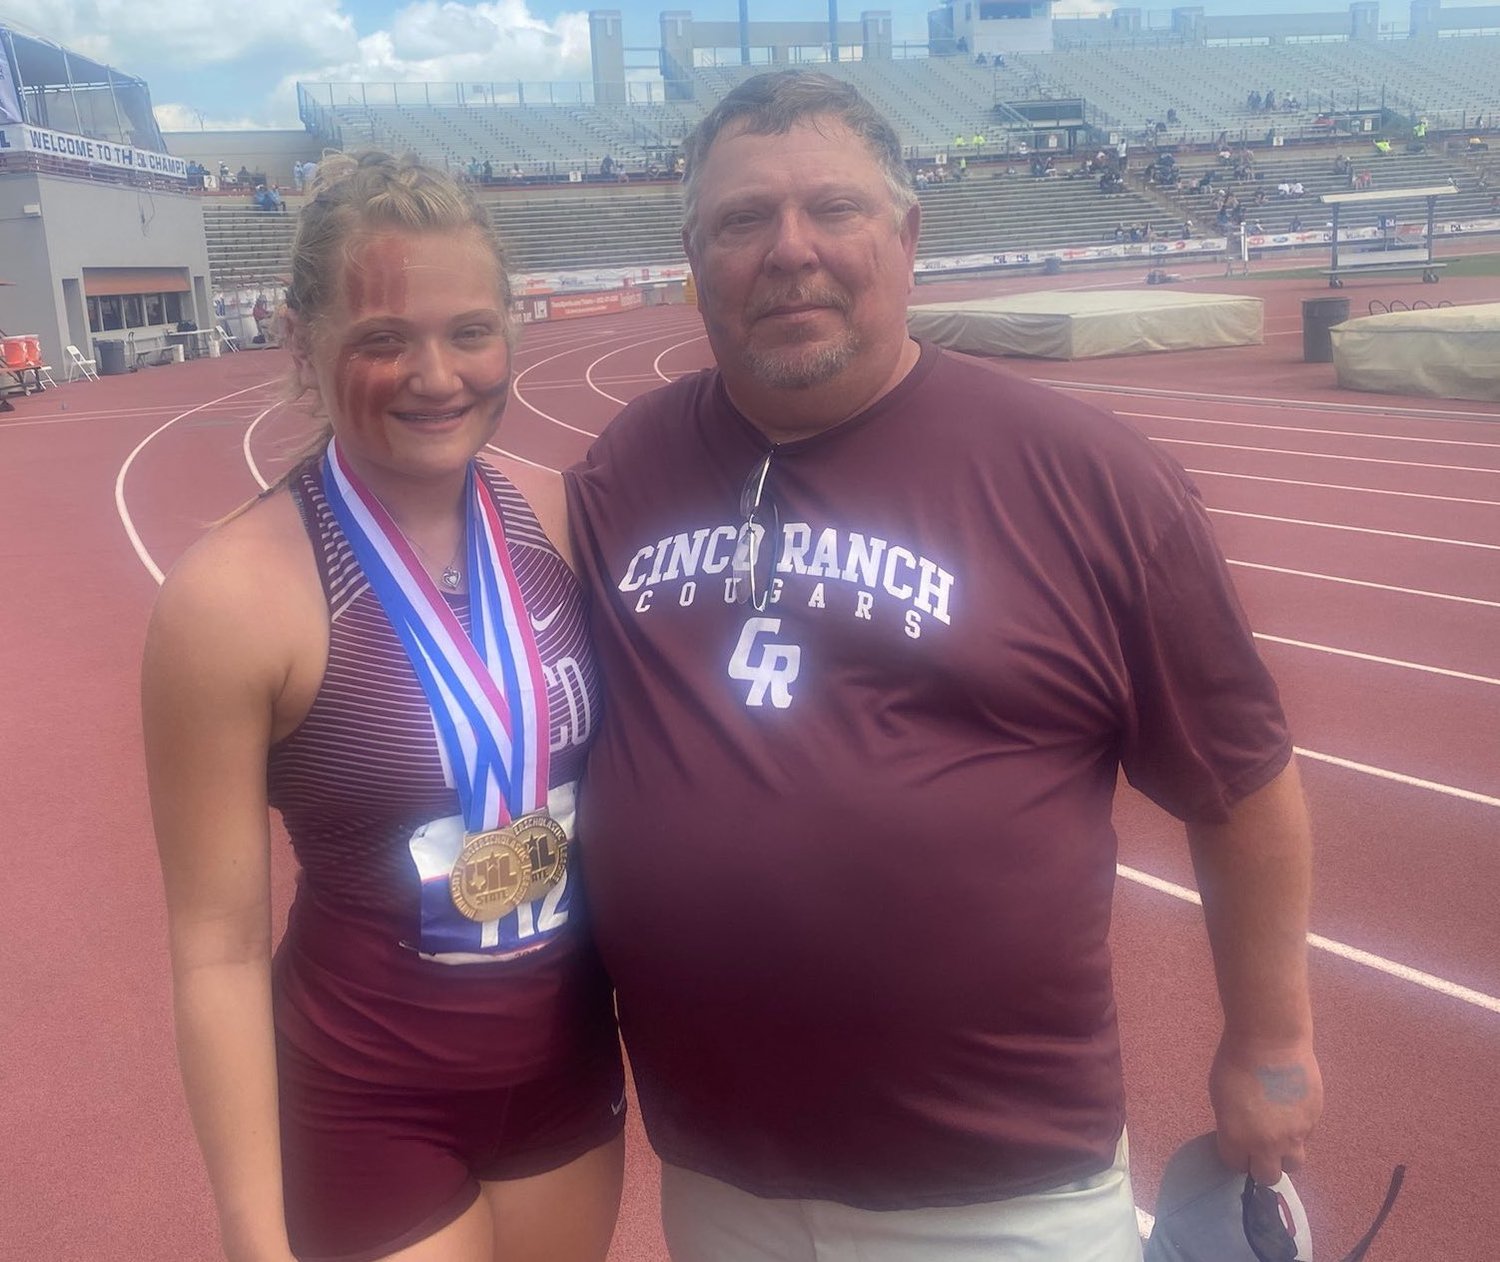 Cinco Ranch senior thrower Amelia Flynt is pictured with Cinco Ranch throws coach J.D. Fincher after winning gold in the discus and shot put throws at the Class 6A state track and field meet Saturday, May 8, at Mike A. Myers Stadium at the University of Texas at Austin. Fincher is retiring after 30 years of coaching.